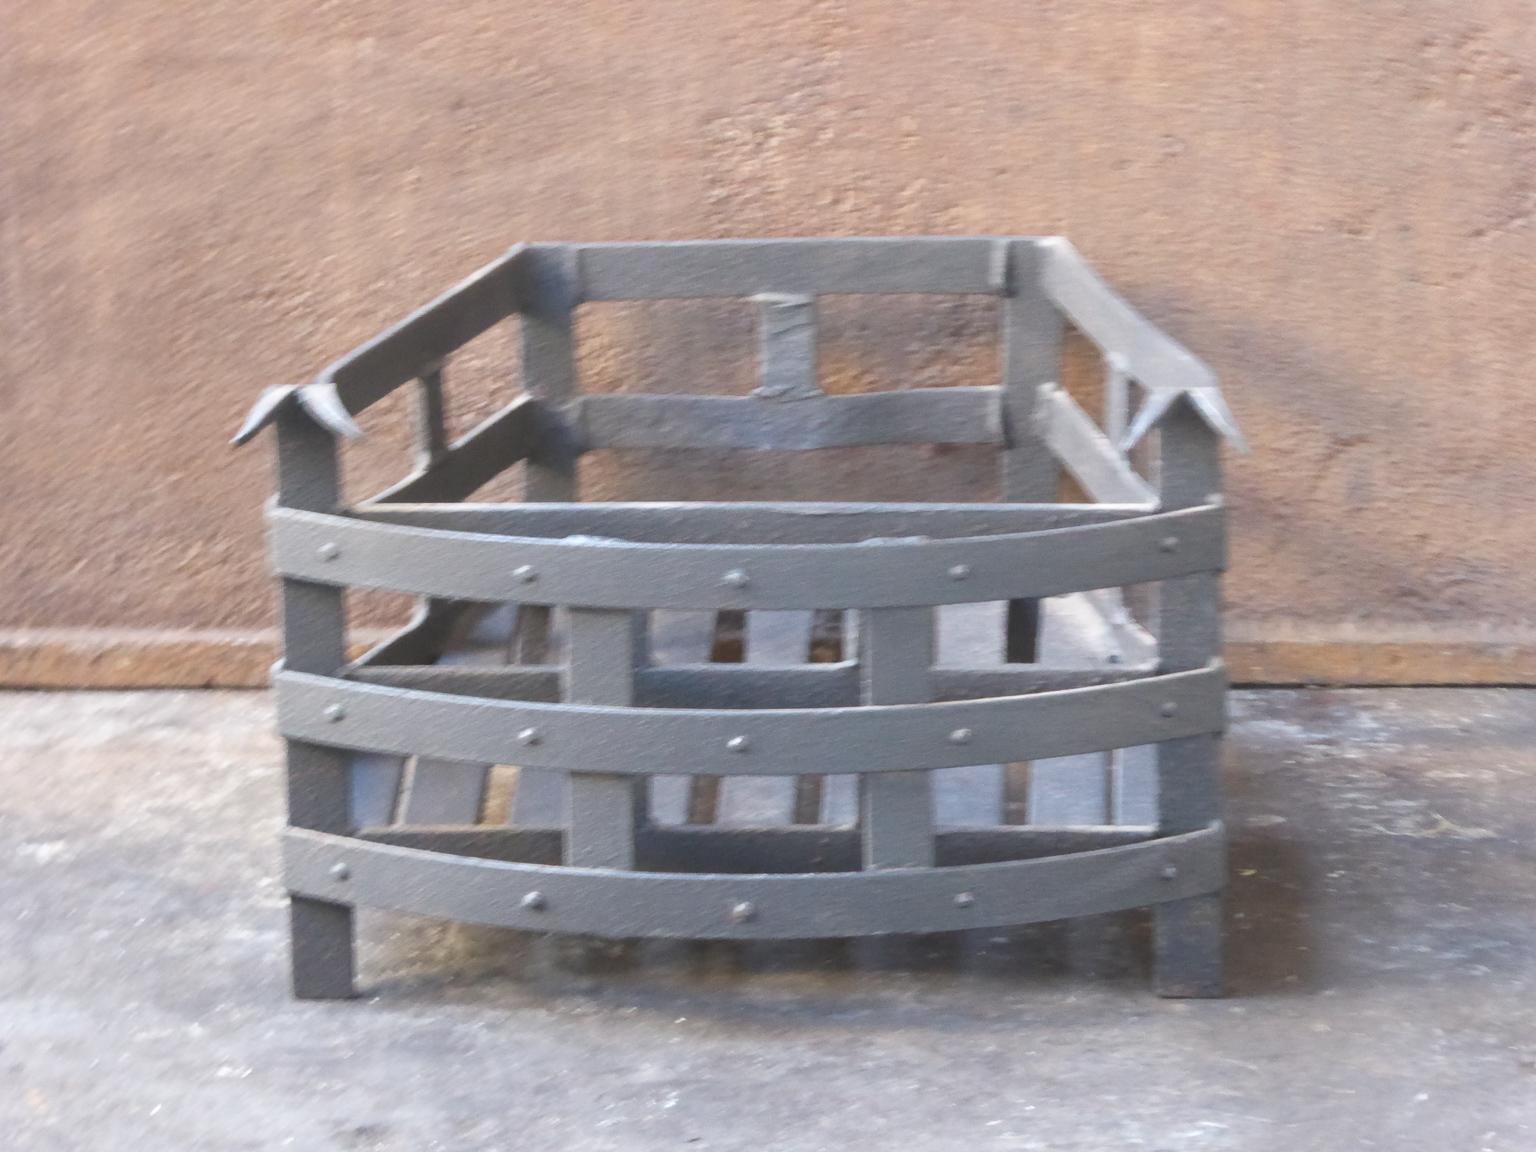 English modernist fireplace basket or fire basket. The fireplace grate is made of wrought iron. The total width of the front of the grate is 14.5 inch (37 cm).

















.